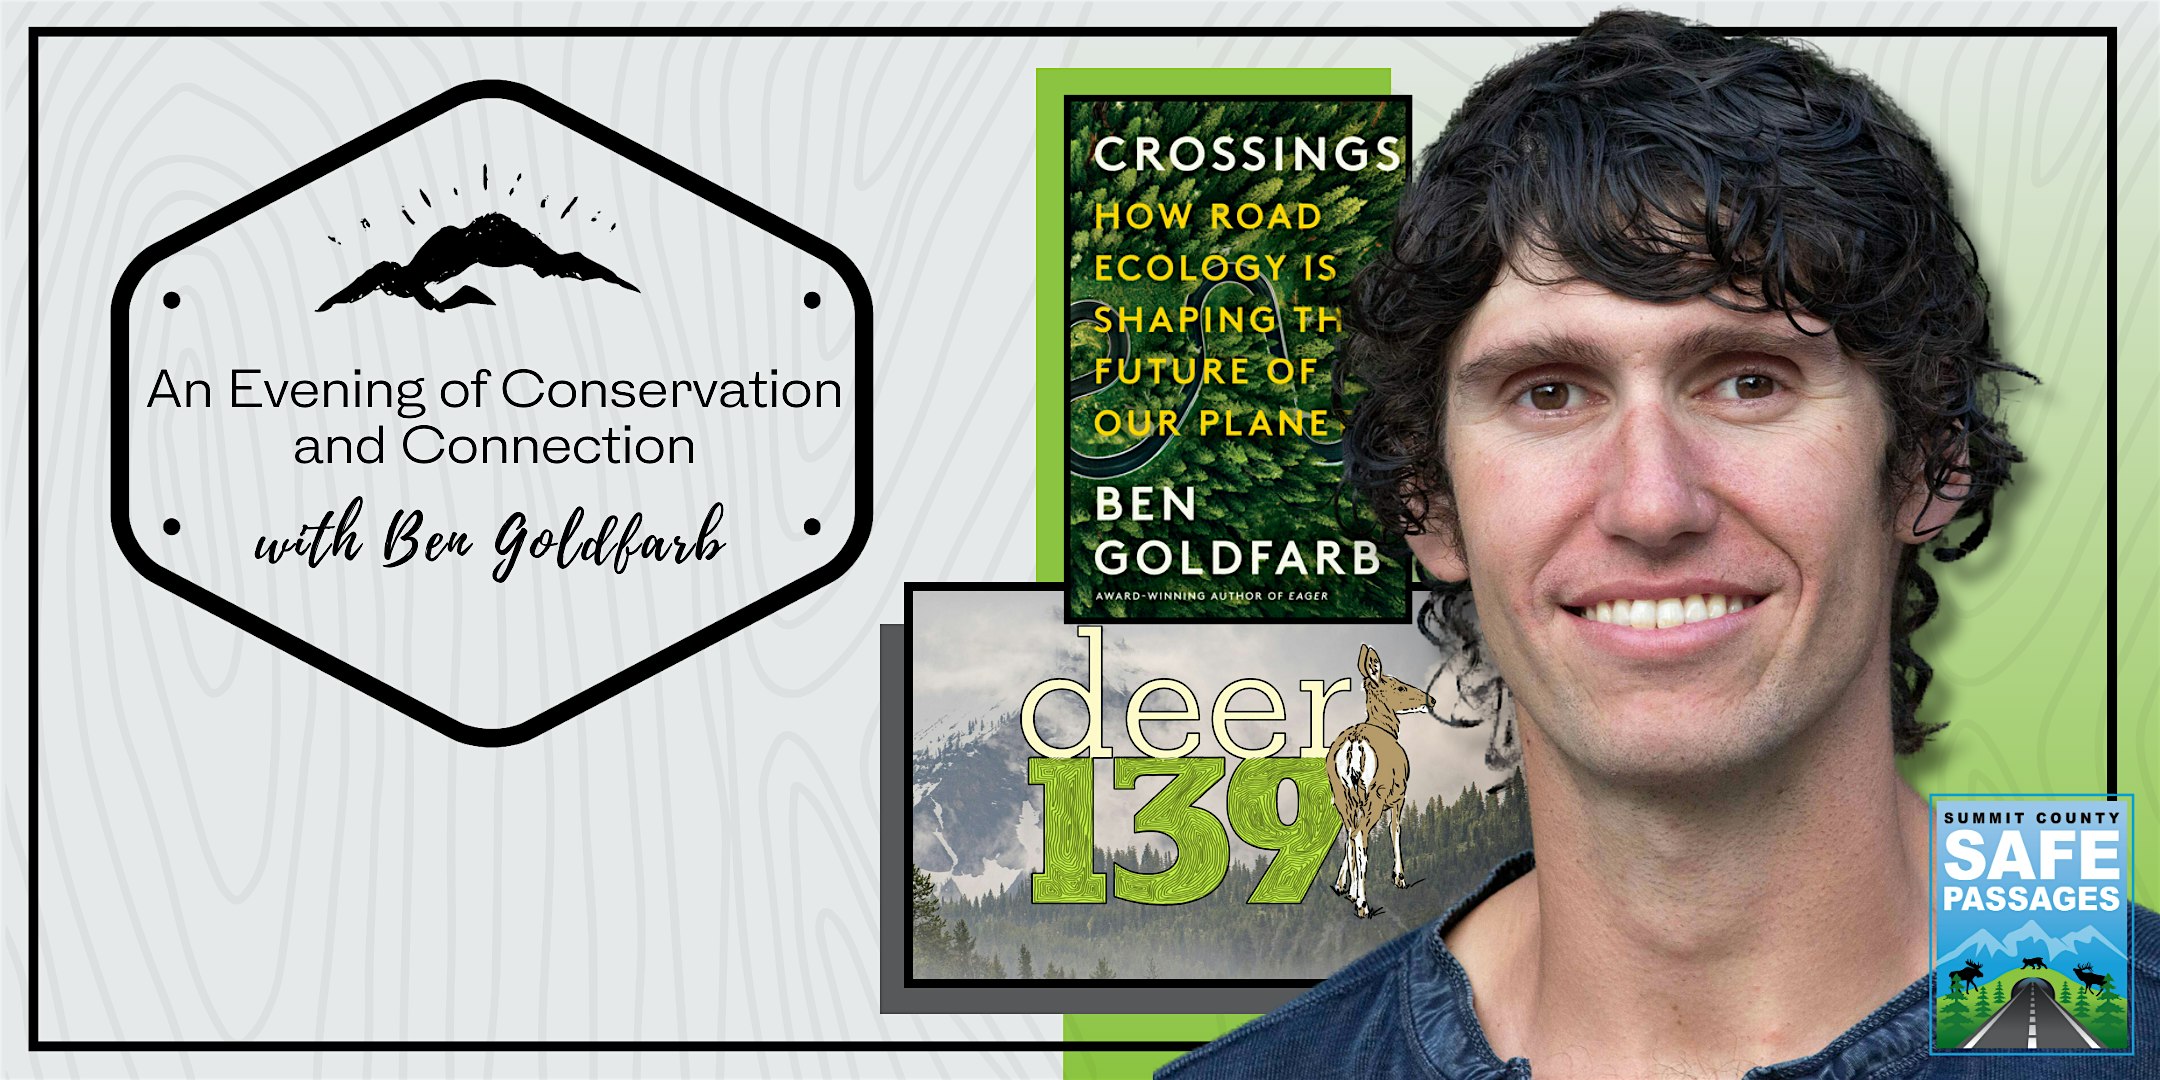 An Evening of Conservation and Connection with Ben Goldfarb